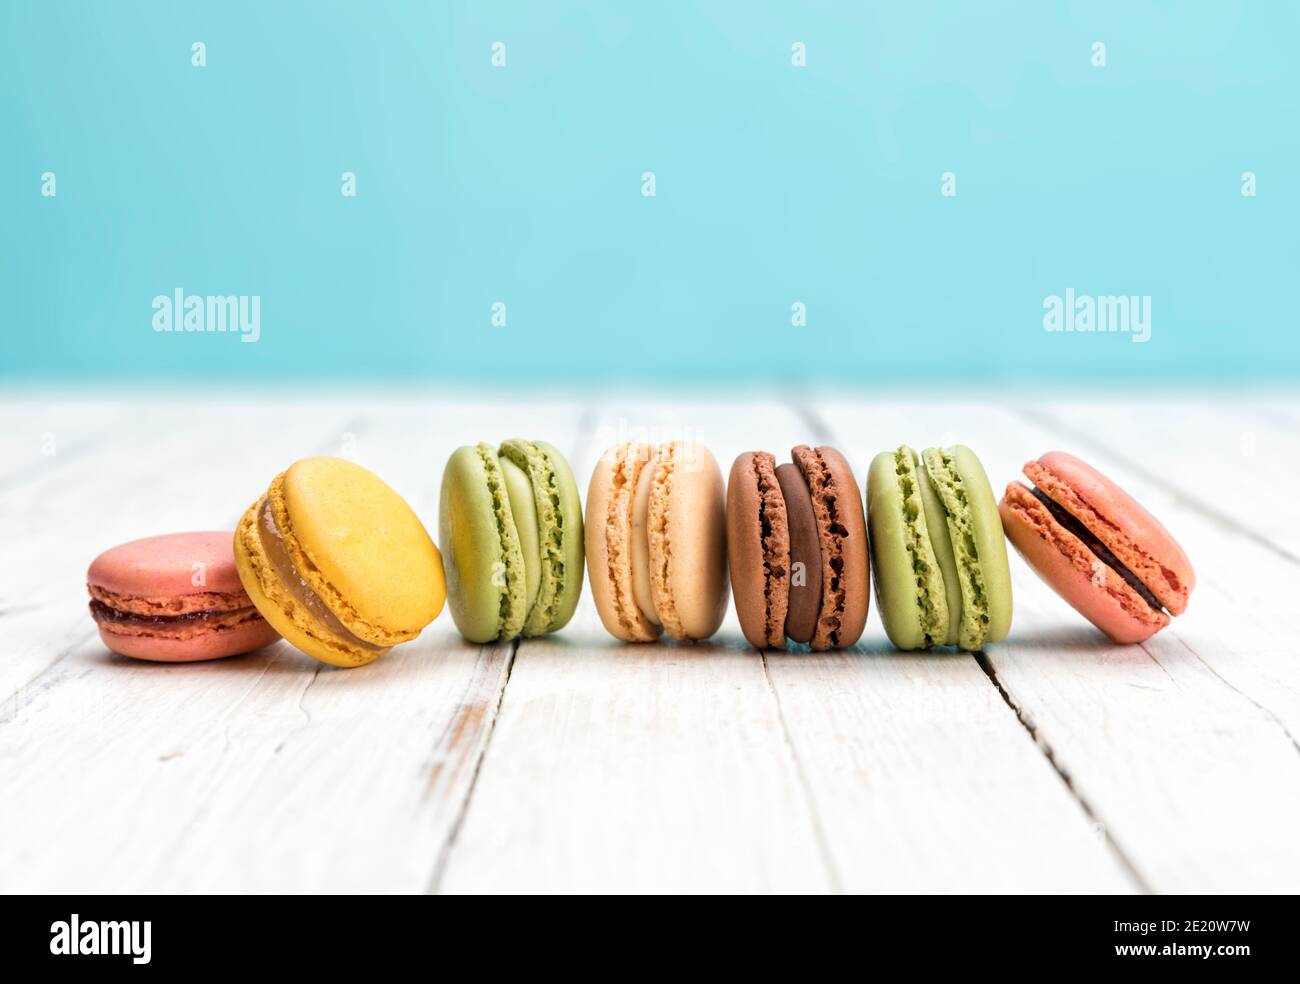 Row of colorful macarons on rustic white table. Delicious French pastry assortment closeup. Stock Photo